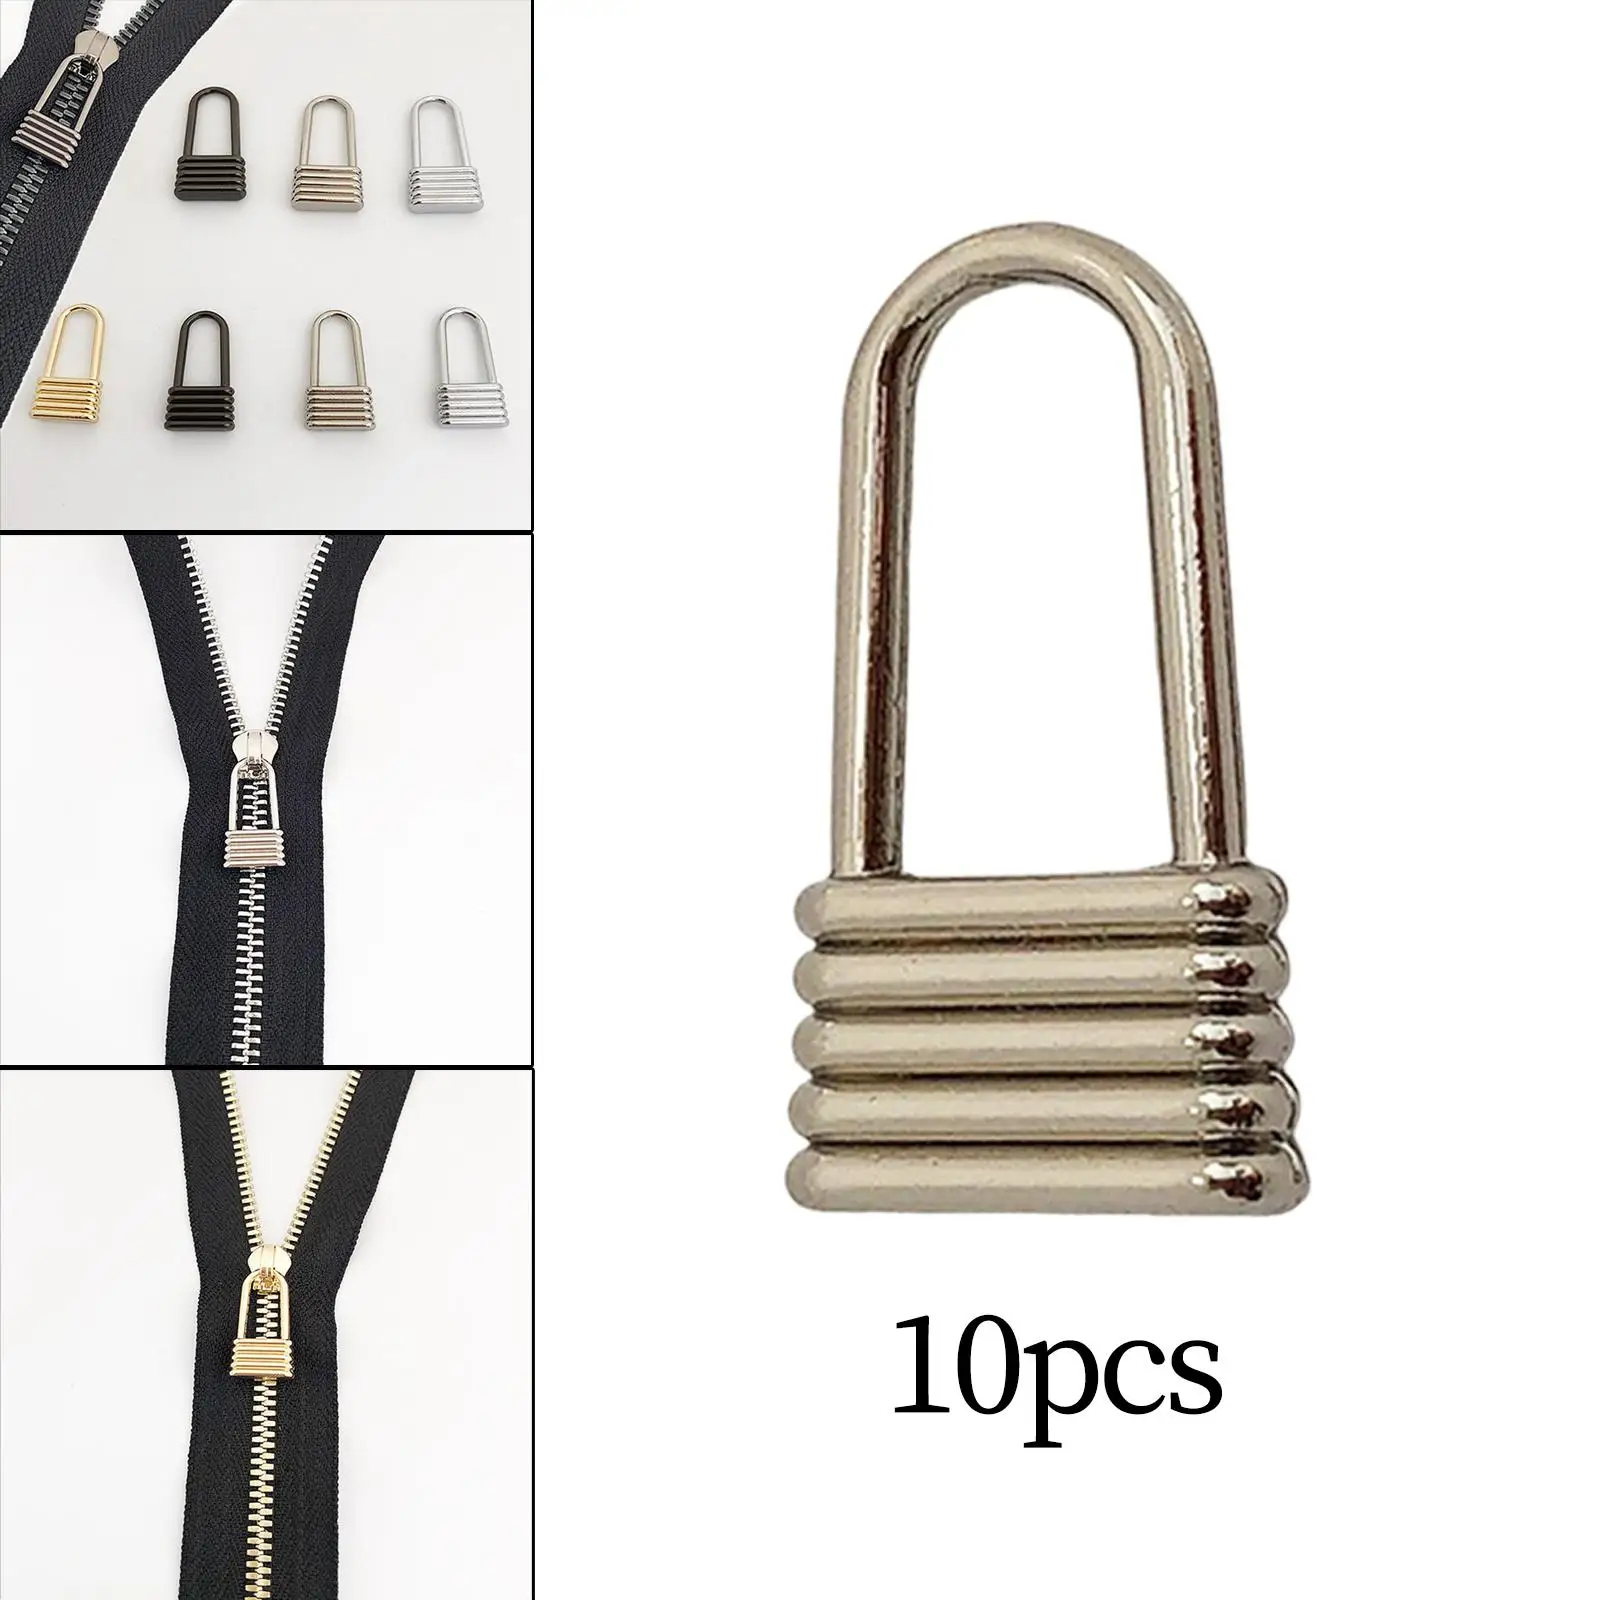 10Pcs Metal Zipper Pulls Accessories Mend Replace Handle Fixer Pull Tab Zipper Heads for Jacket Luggage Backpack Purse Suitcase